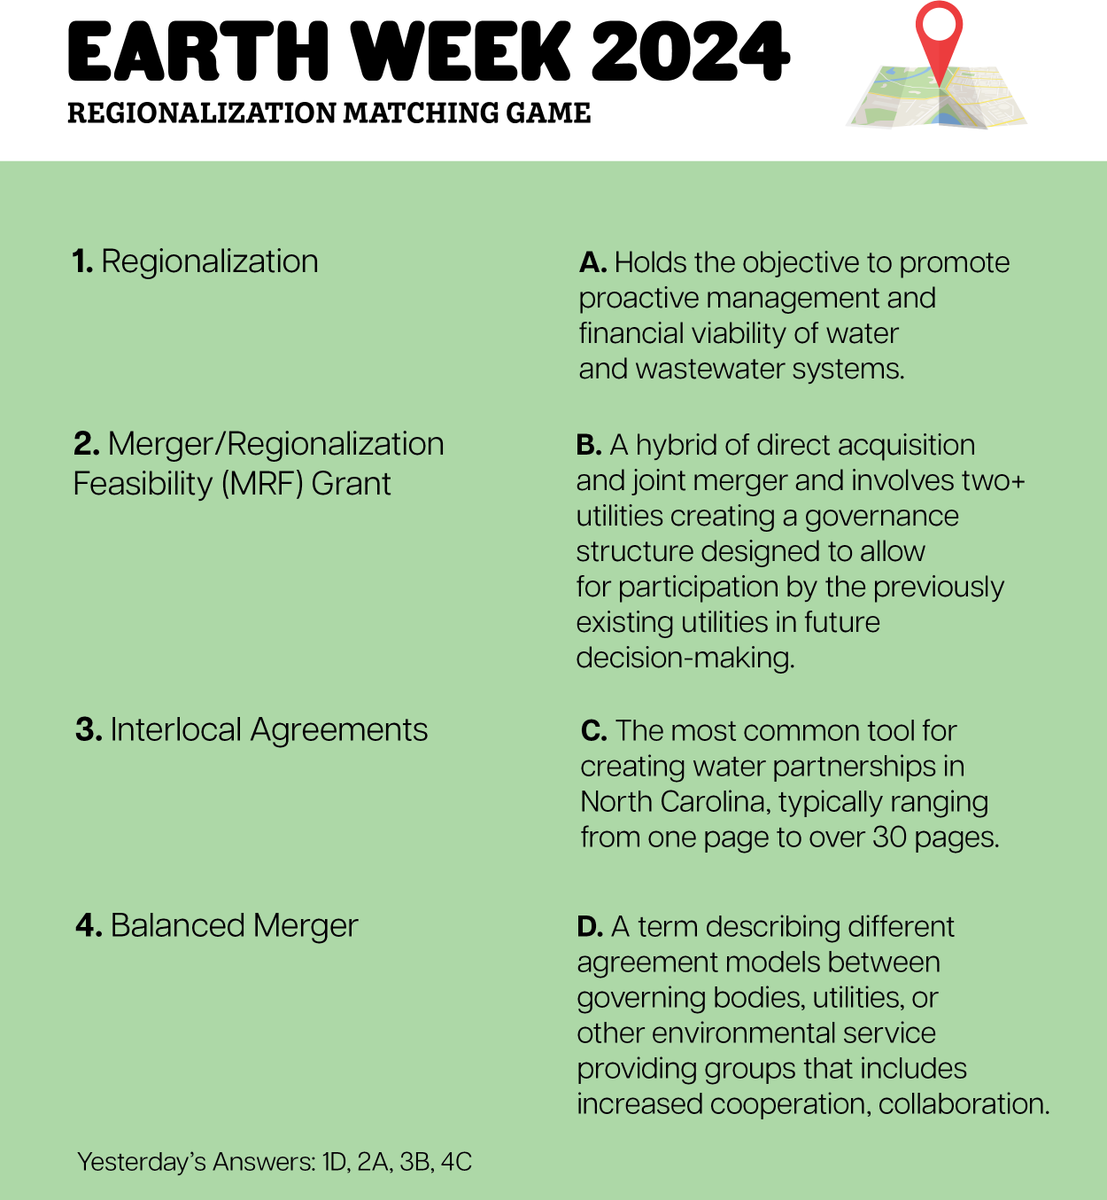 Happy Thursday! Today's matching game is on regionalization, with answers to the last game written at the bottom. How many did you get right? Comment down below! 🎉 #EarthWeek #Regionalization #EFC